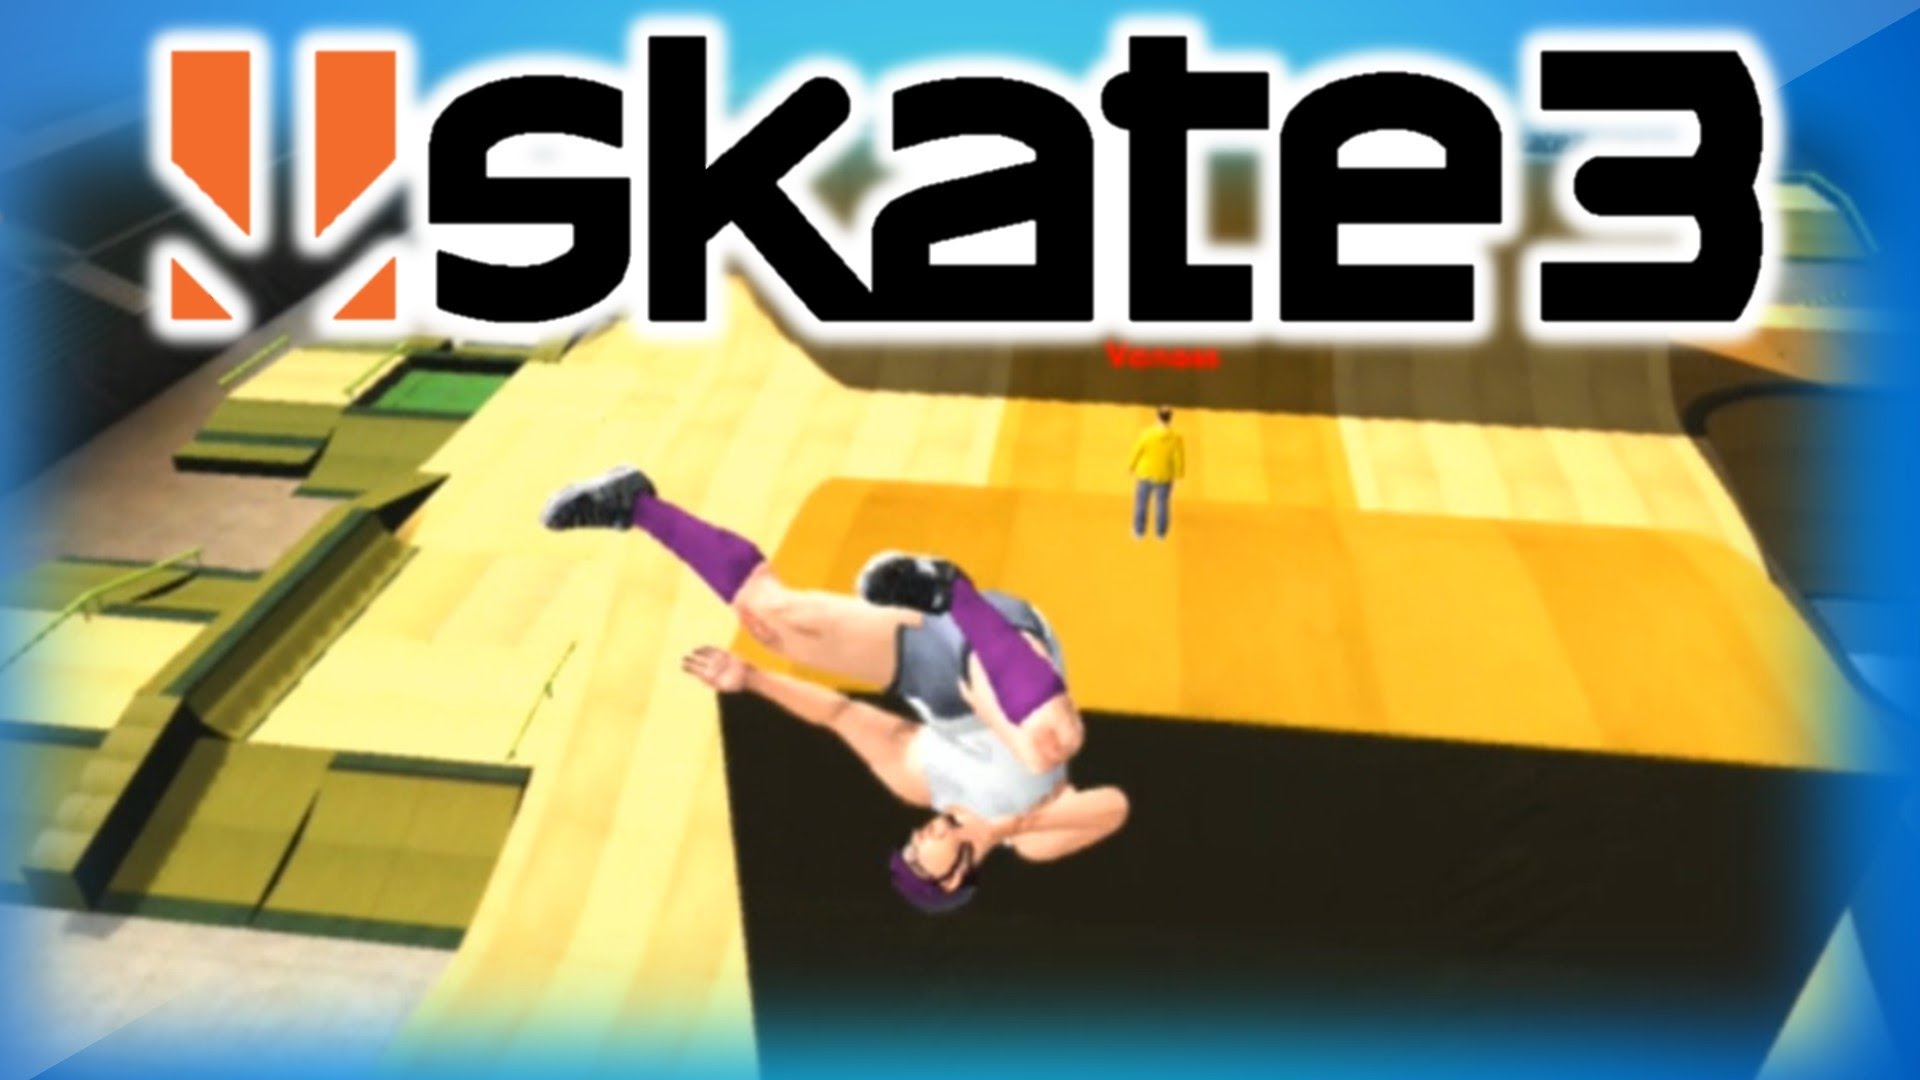 Skate Funny Moments Chicken Dance Kung Fu Fighting Happy